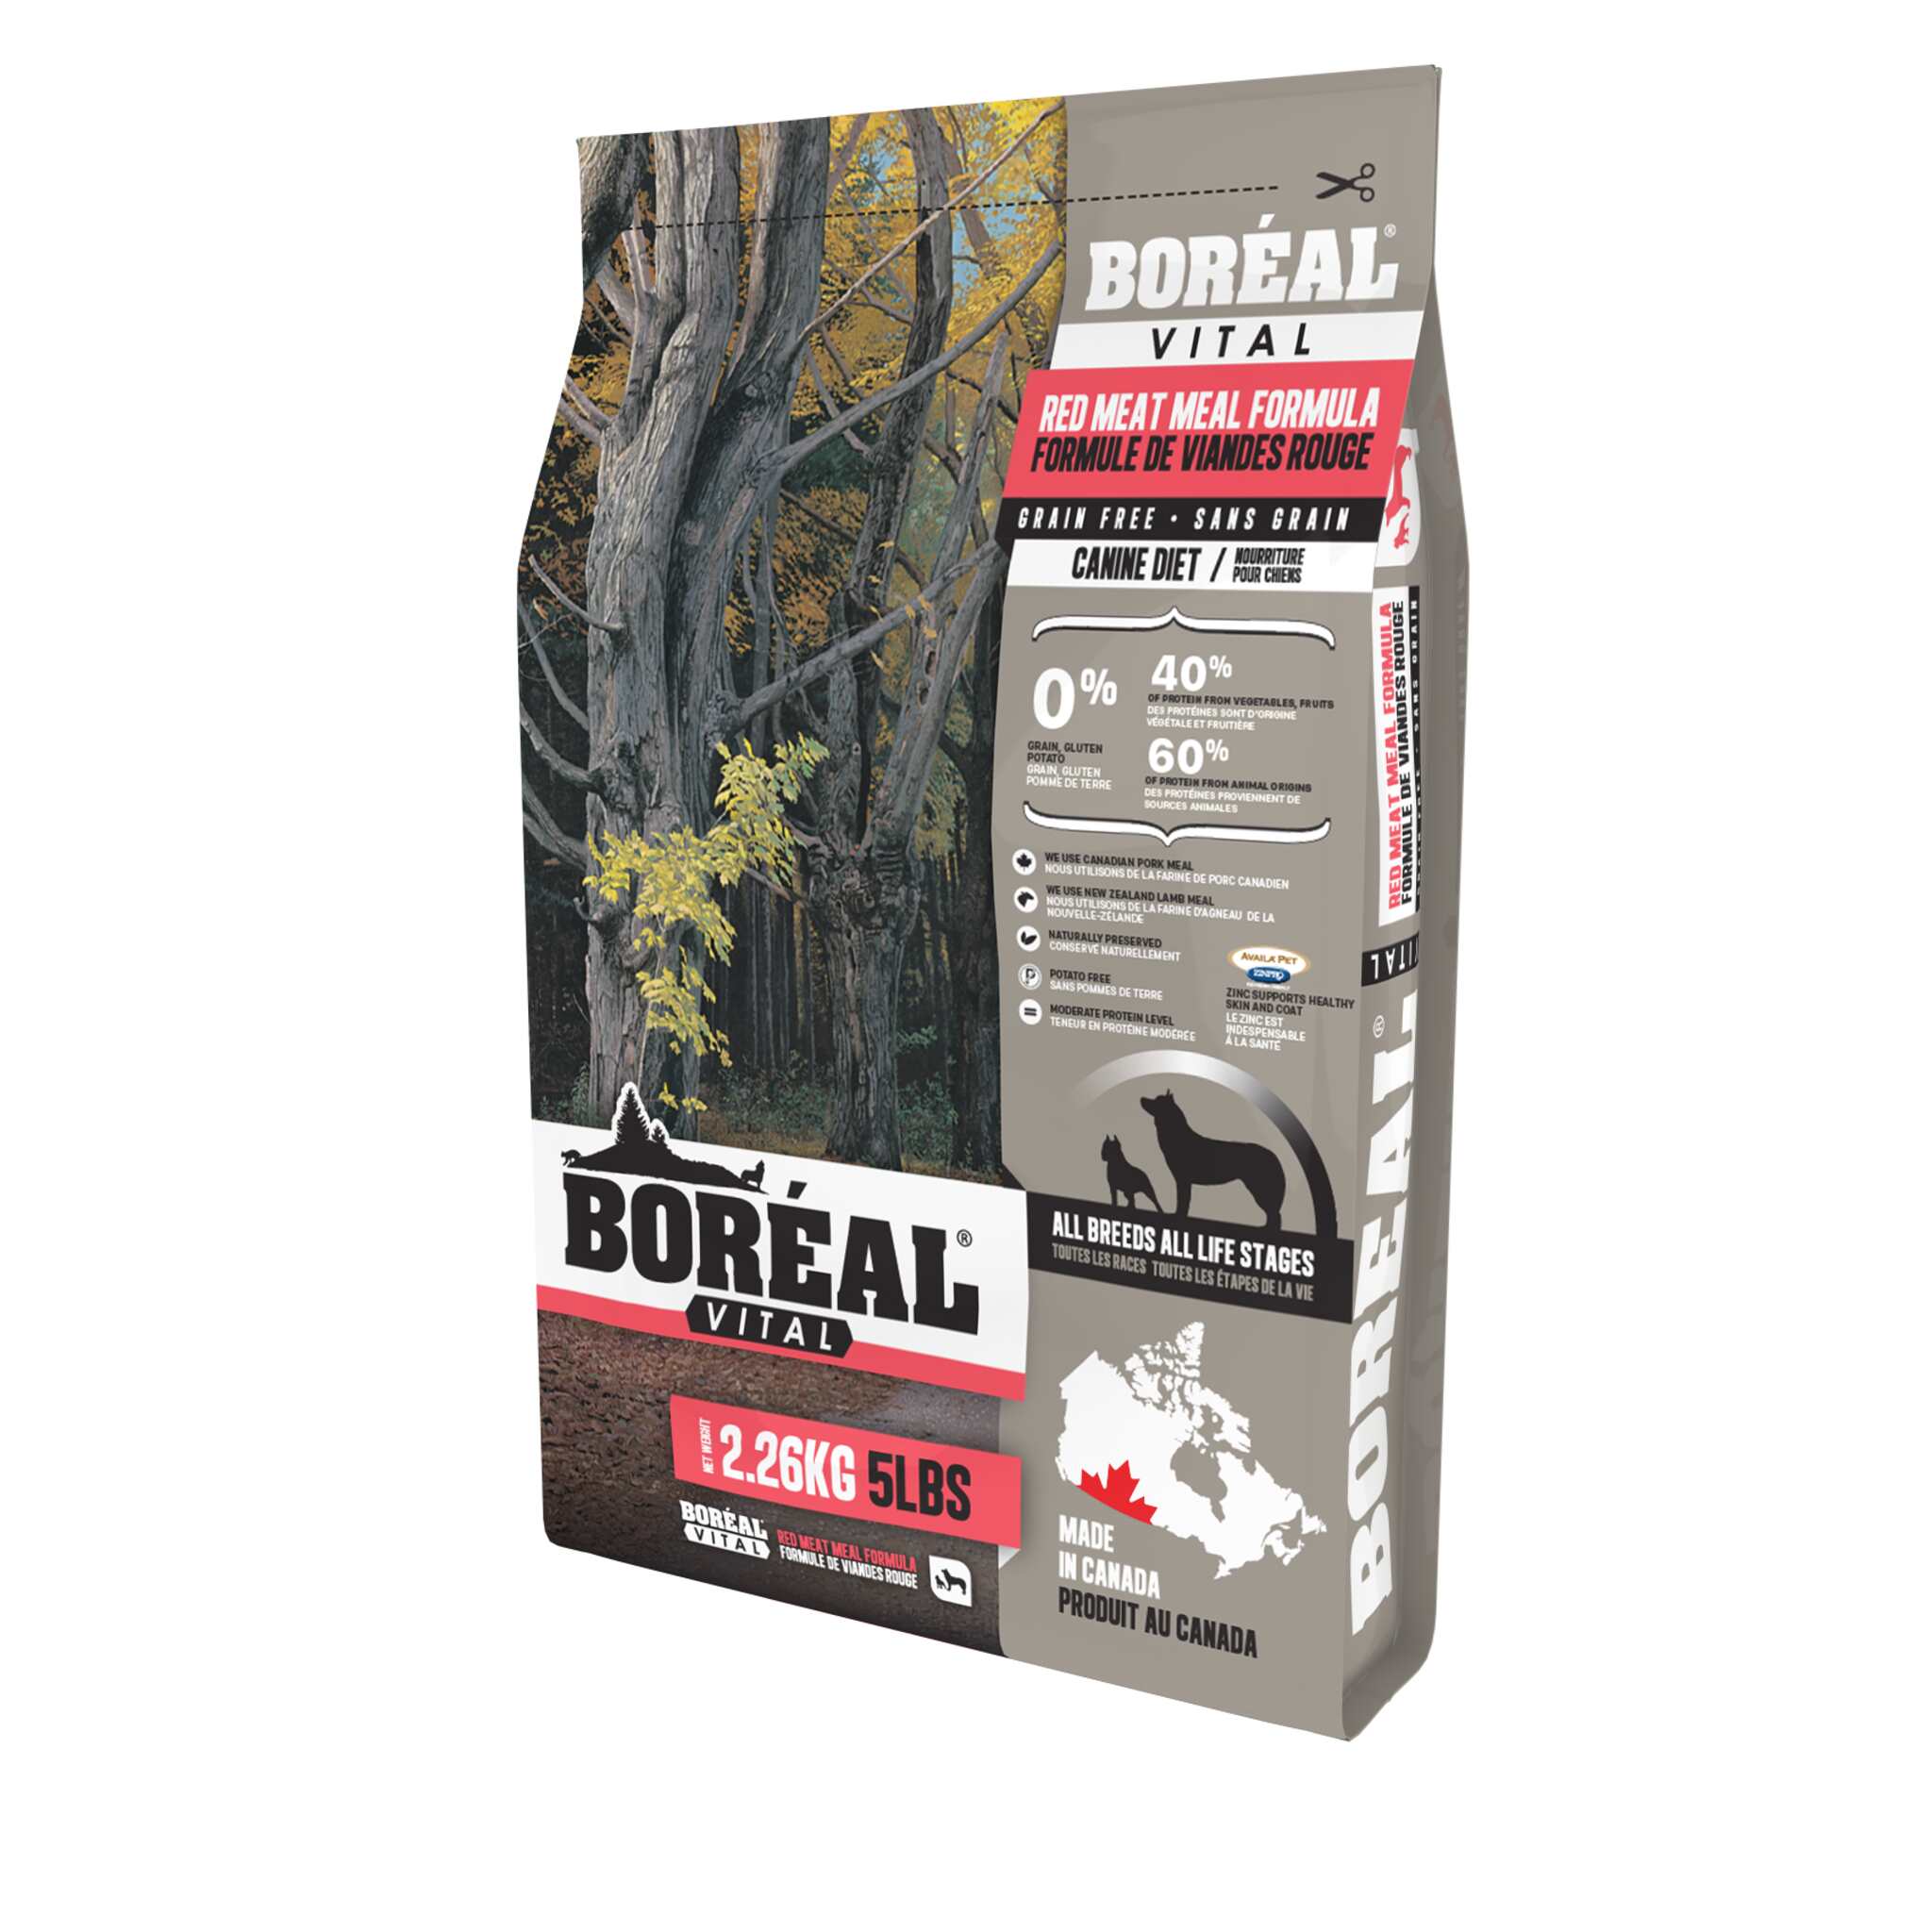 Boreal dry dog food, Vital blend, red meat meal recipe, grain-free, 5 lb.